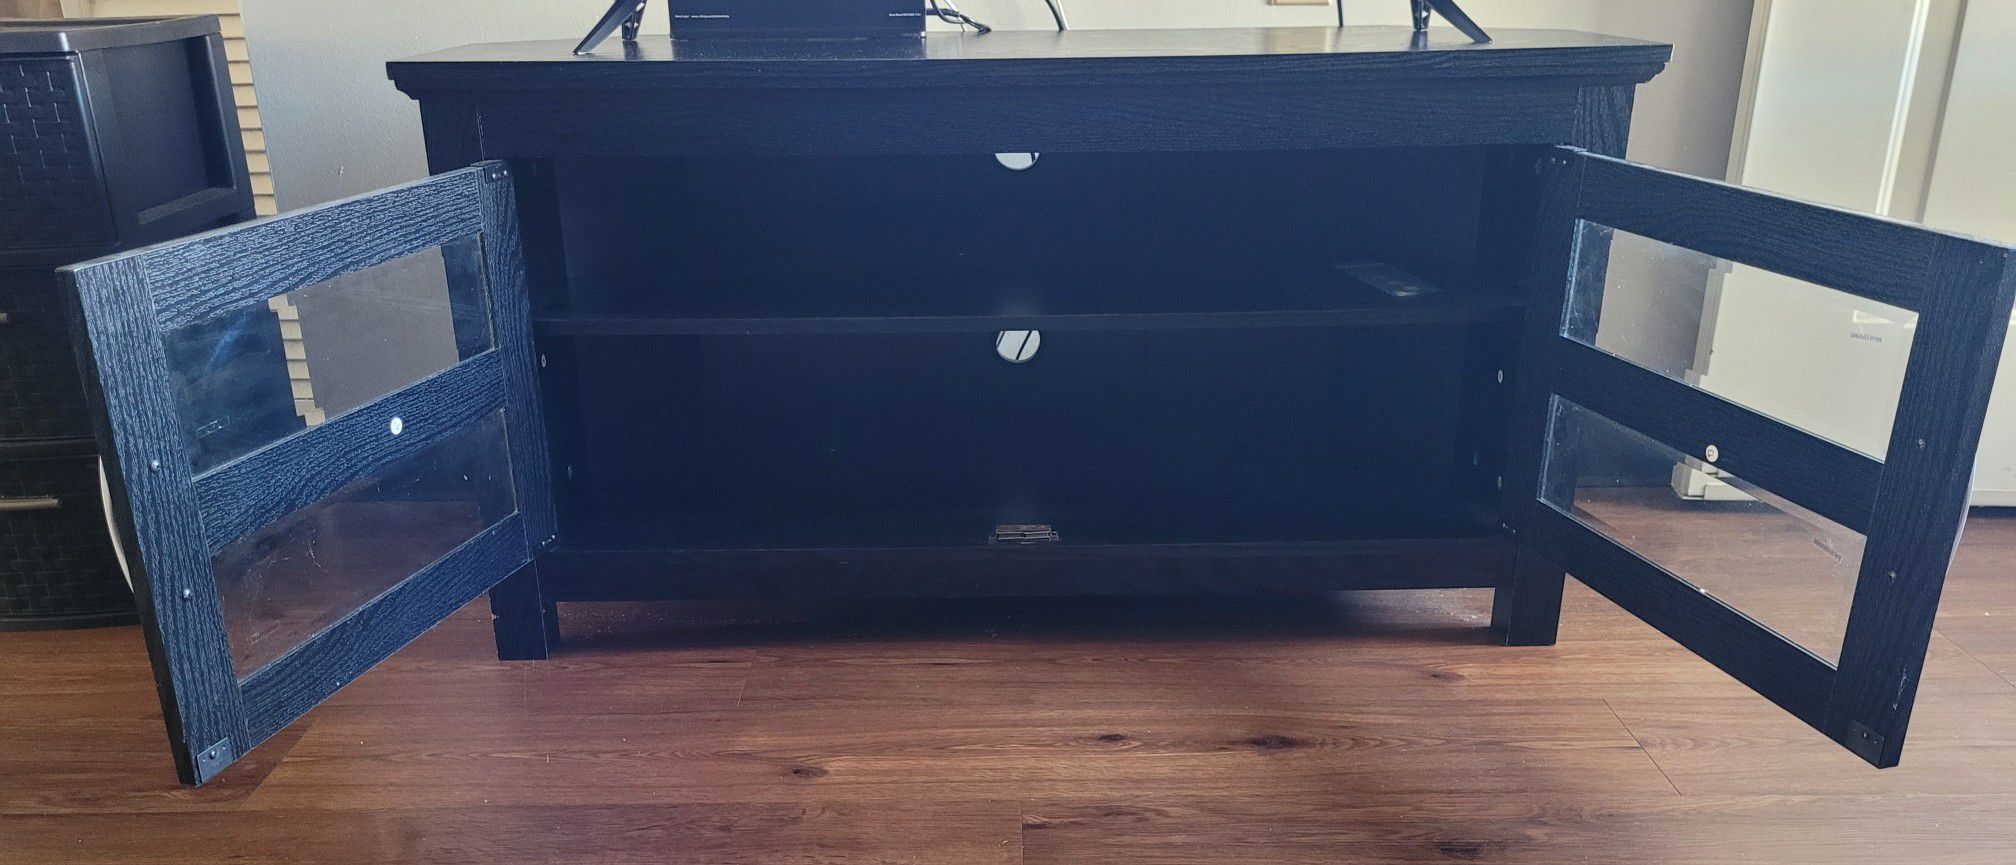 44 Inch TV Stand 